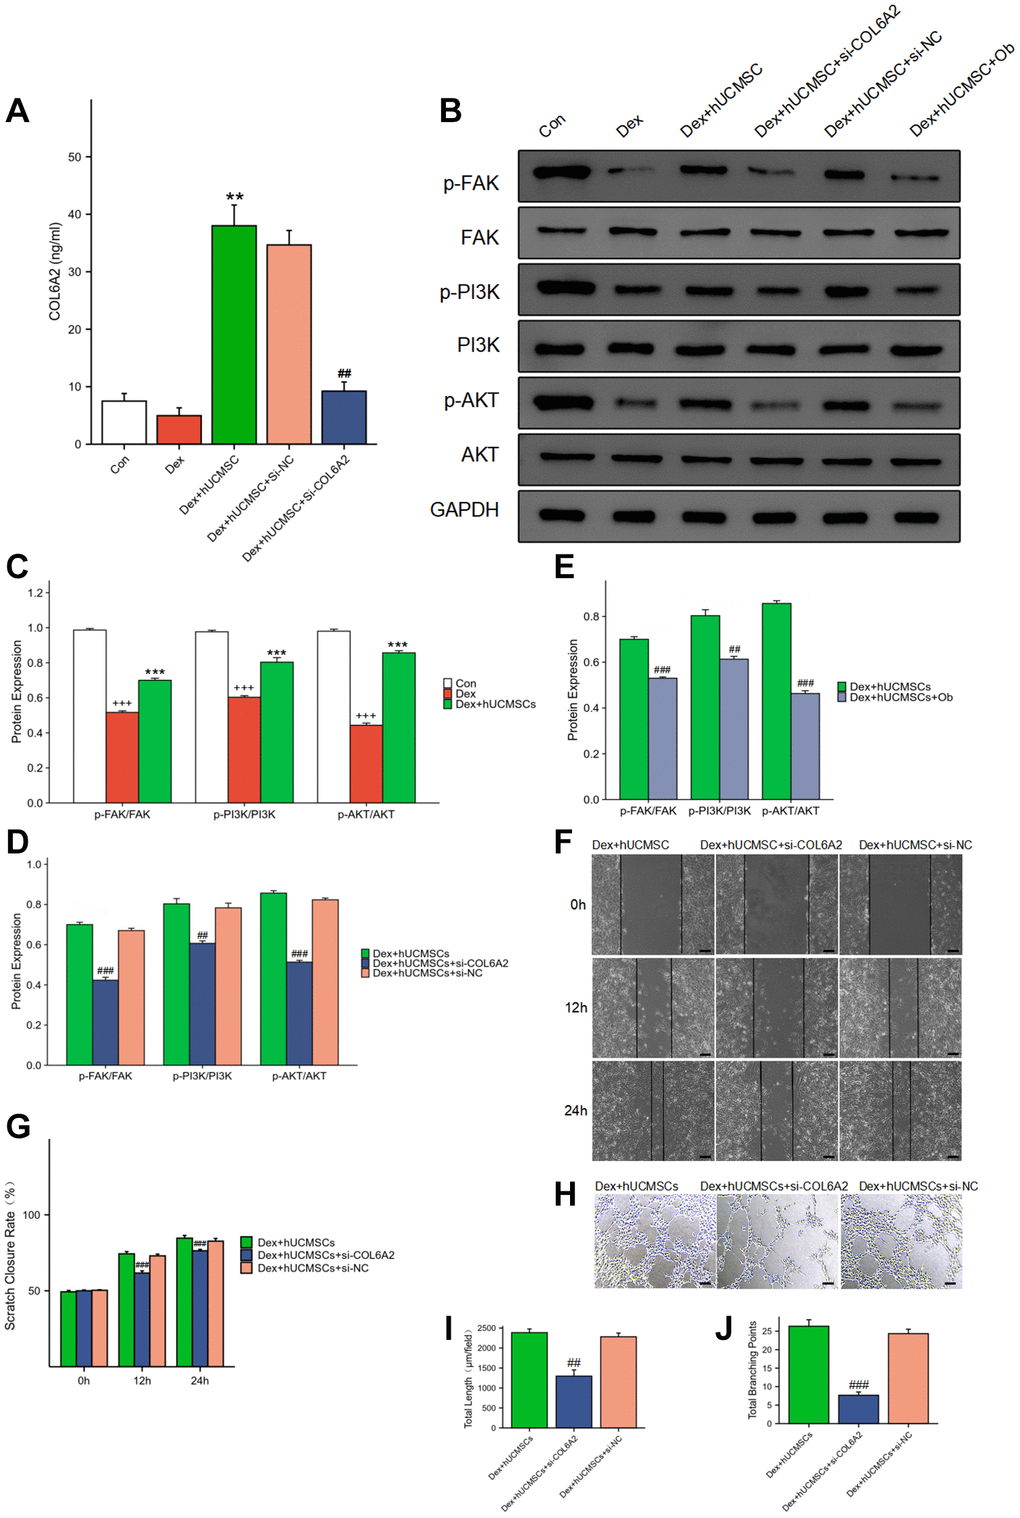 hUCMSCs played a protective role by regulating FAK/PI3K/AKT signaling pathway through COL6A2. (A) COL6A2 levels in the cell supernatants, assessed via ELISA. (B–E) The protein level of p-FAK, FAK, p-PI3K, PI3K, p-AKT, AKT and GAPDH in BMECs by Western blot. (F) Wound healing assay at 0, 12, and 24 h after co-culture with hUCMSCs. (G) Scratch closure rate in three groups. (H) Tube formation assay at 12 h after co-culture with hUCMSCs. (I, J) Total length and Total branching points in three groups. The data are presented as the means ± SD (n = 3). +p ++p +++p *p **p ***p #p ##p ###p 